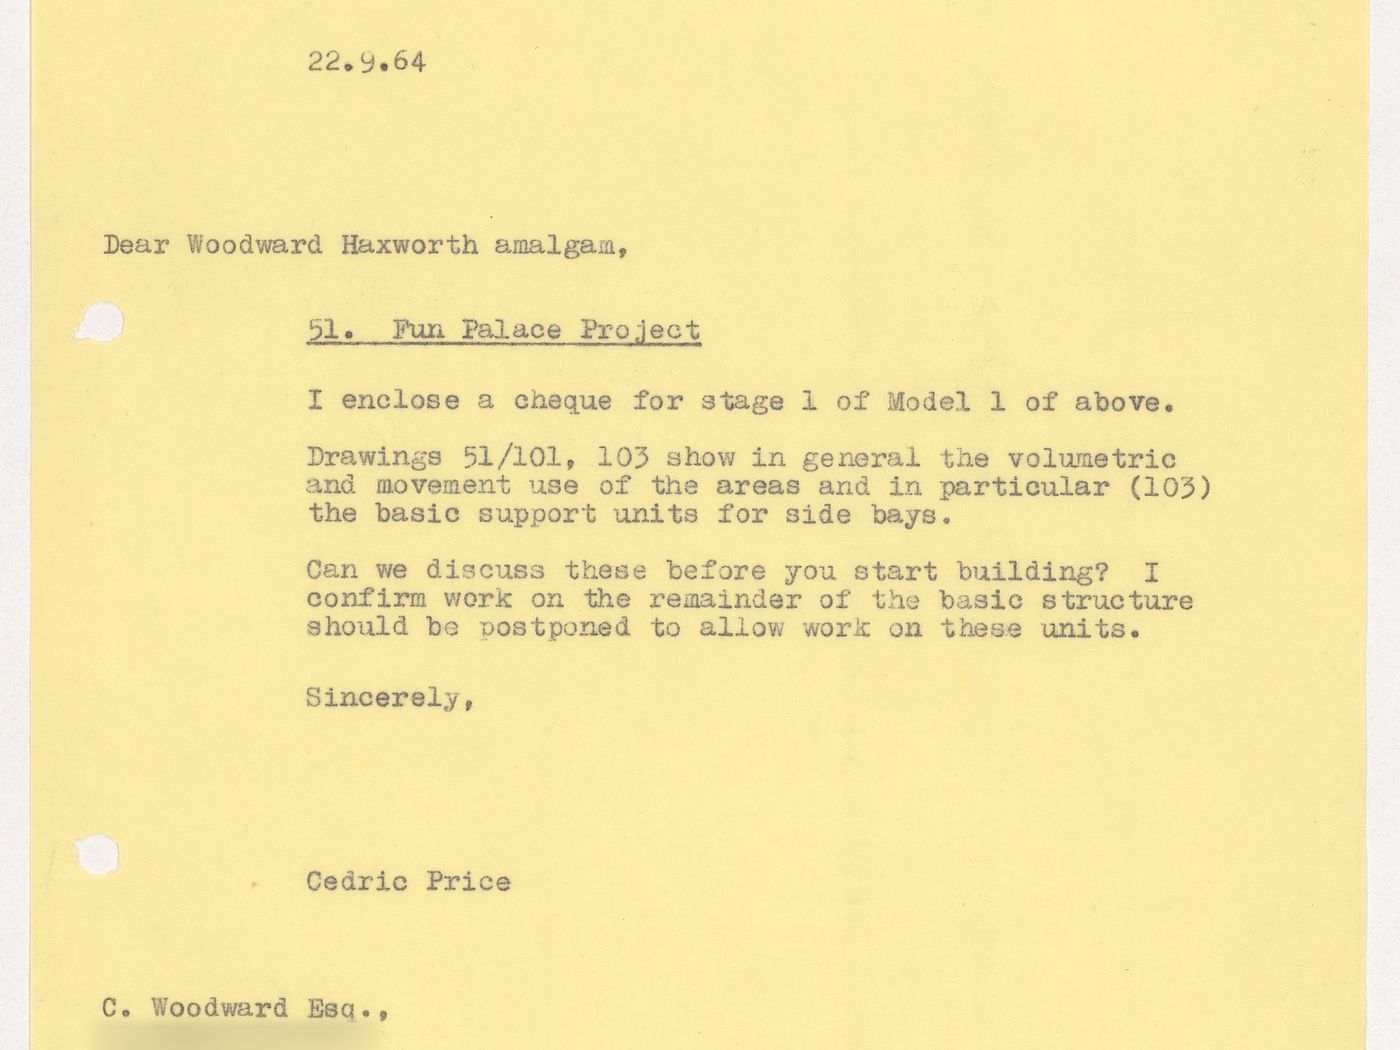 Letter from Cedric Price to C. Woodward regarding the Fun Palace Project